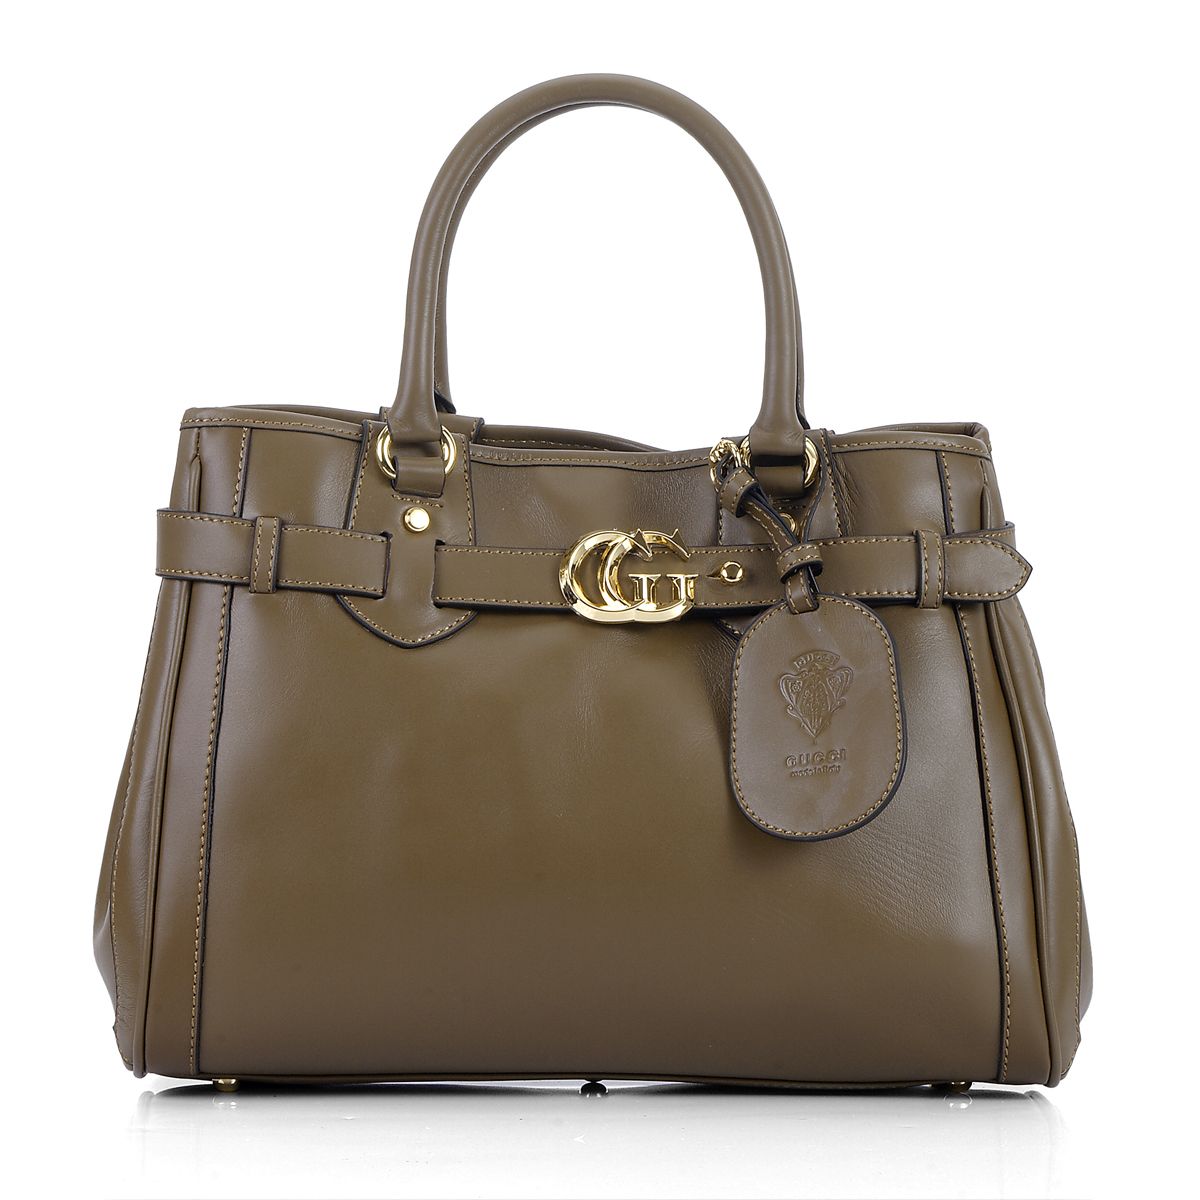 Hollywood Trendy: Leather Handbags For Women